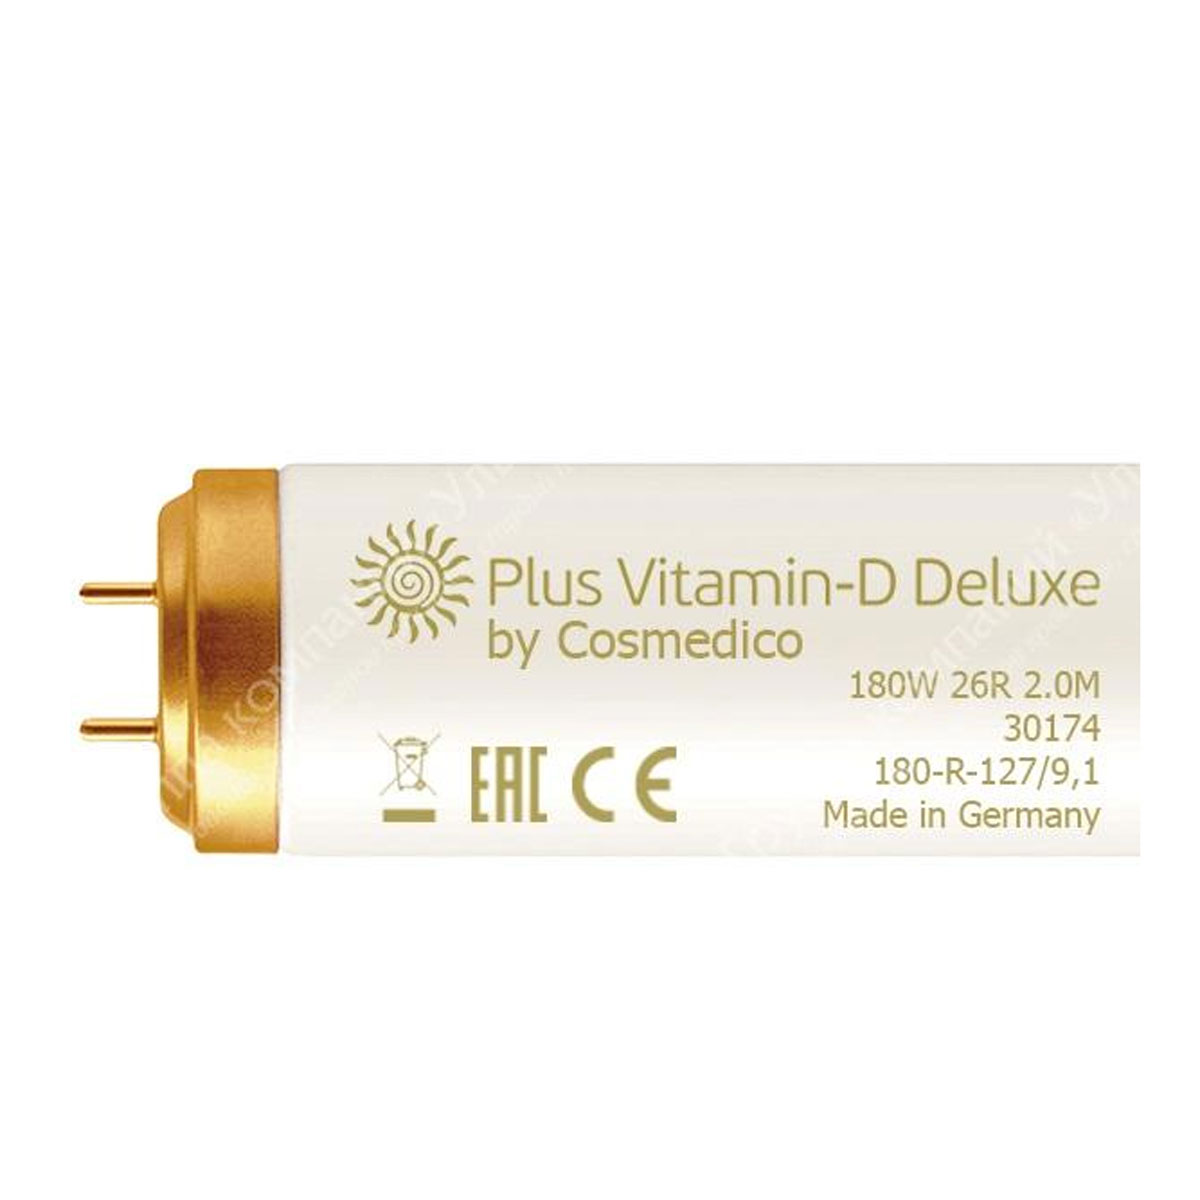 Plus Vitamin-D Deluxe 33R 200W by Cosmedico